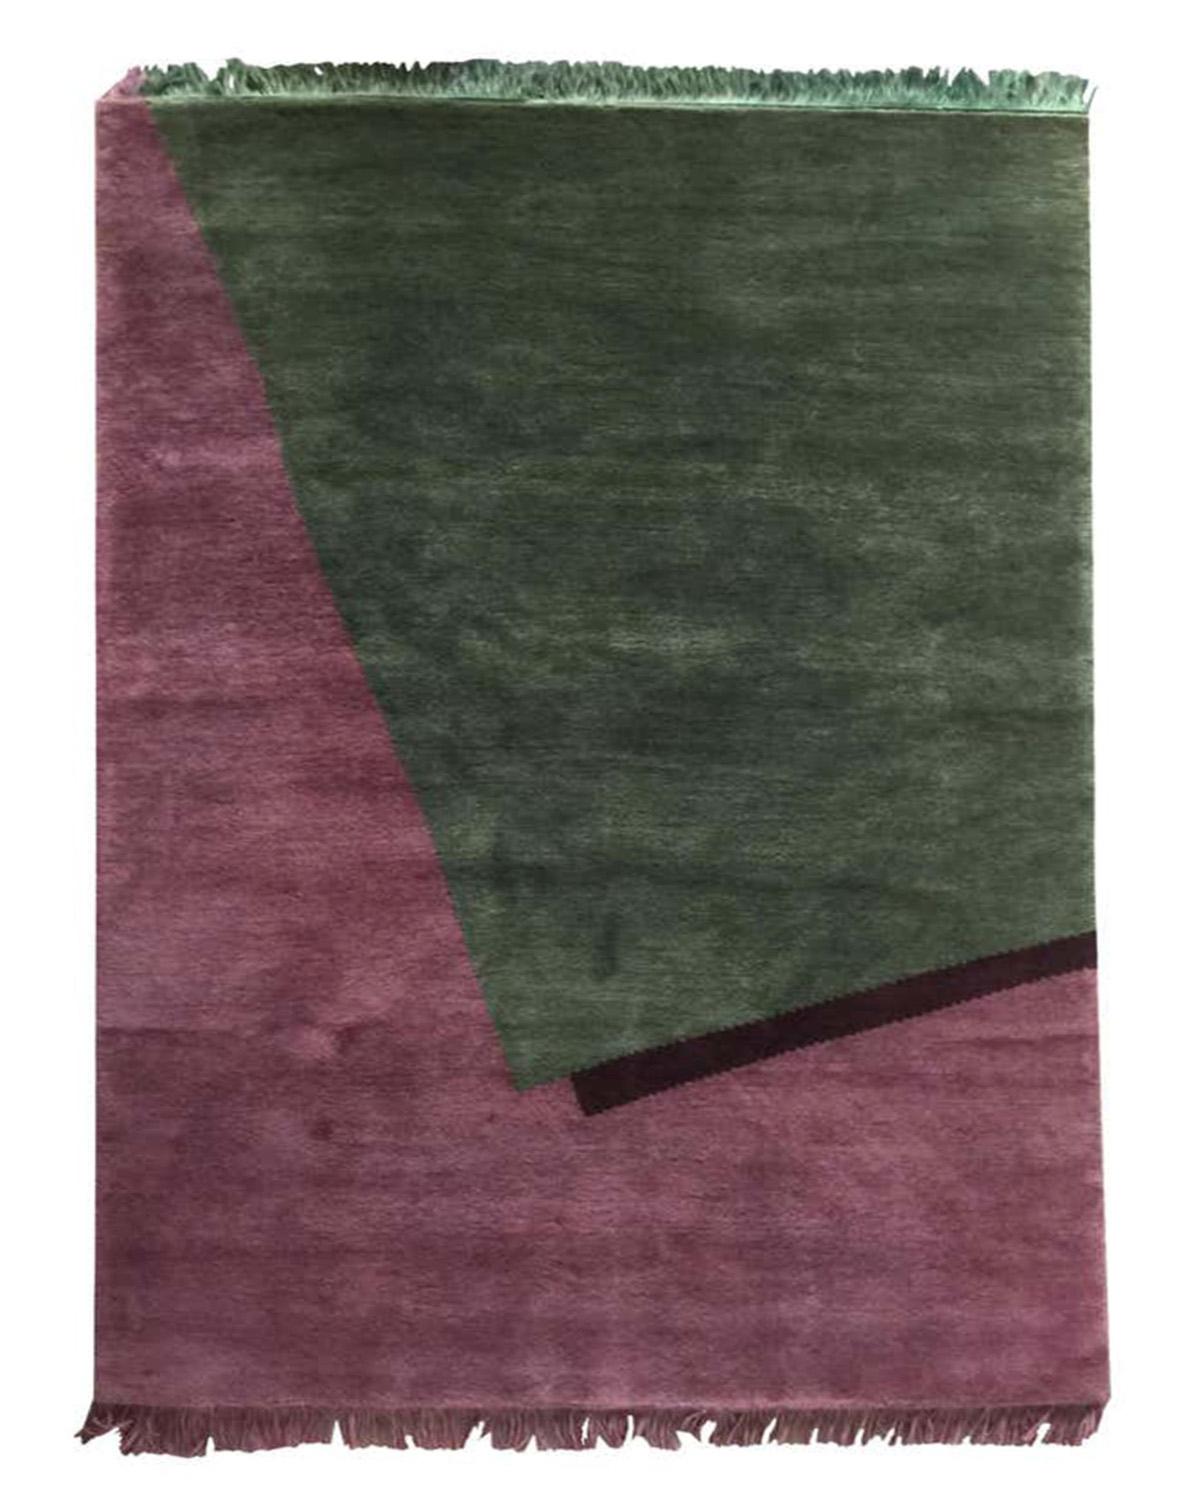 Rug Arches - Carpet Hand Knotted Wool Burgundy Green Geometrical Colored Fringes